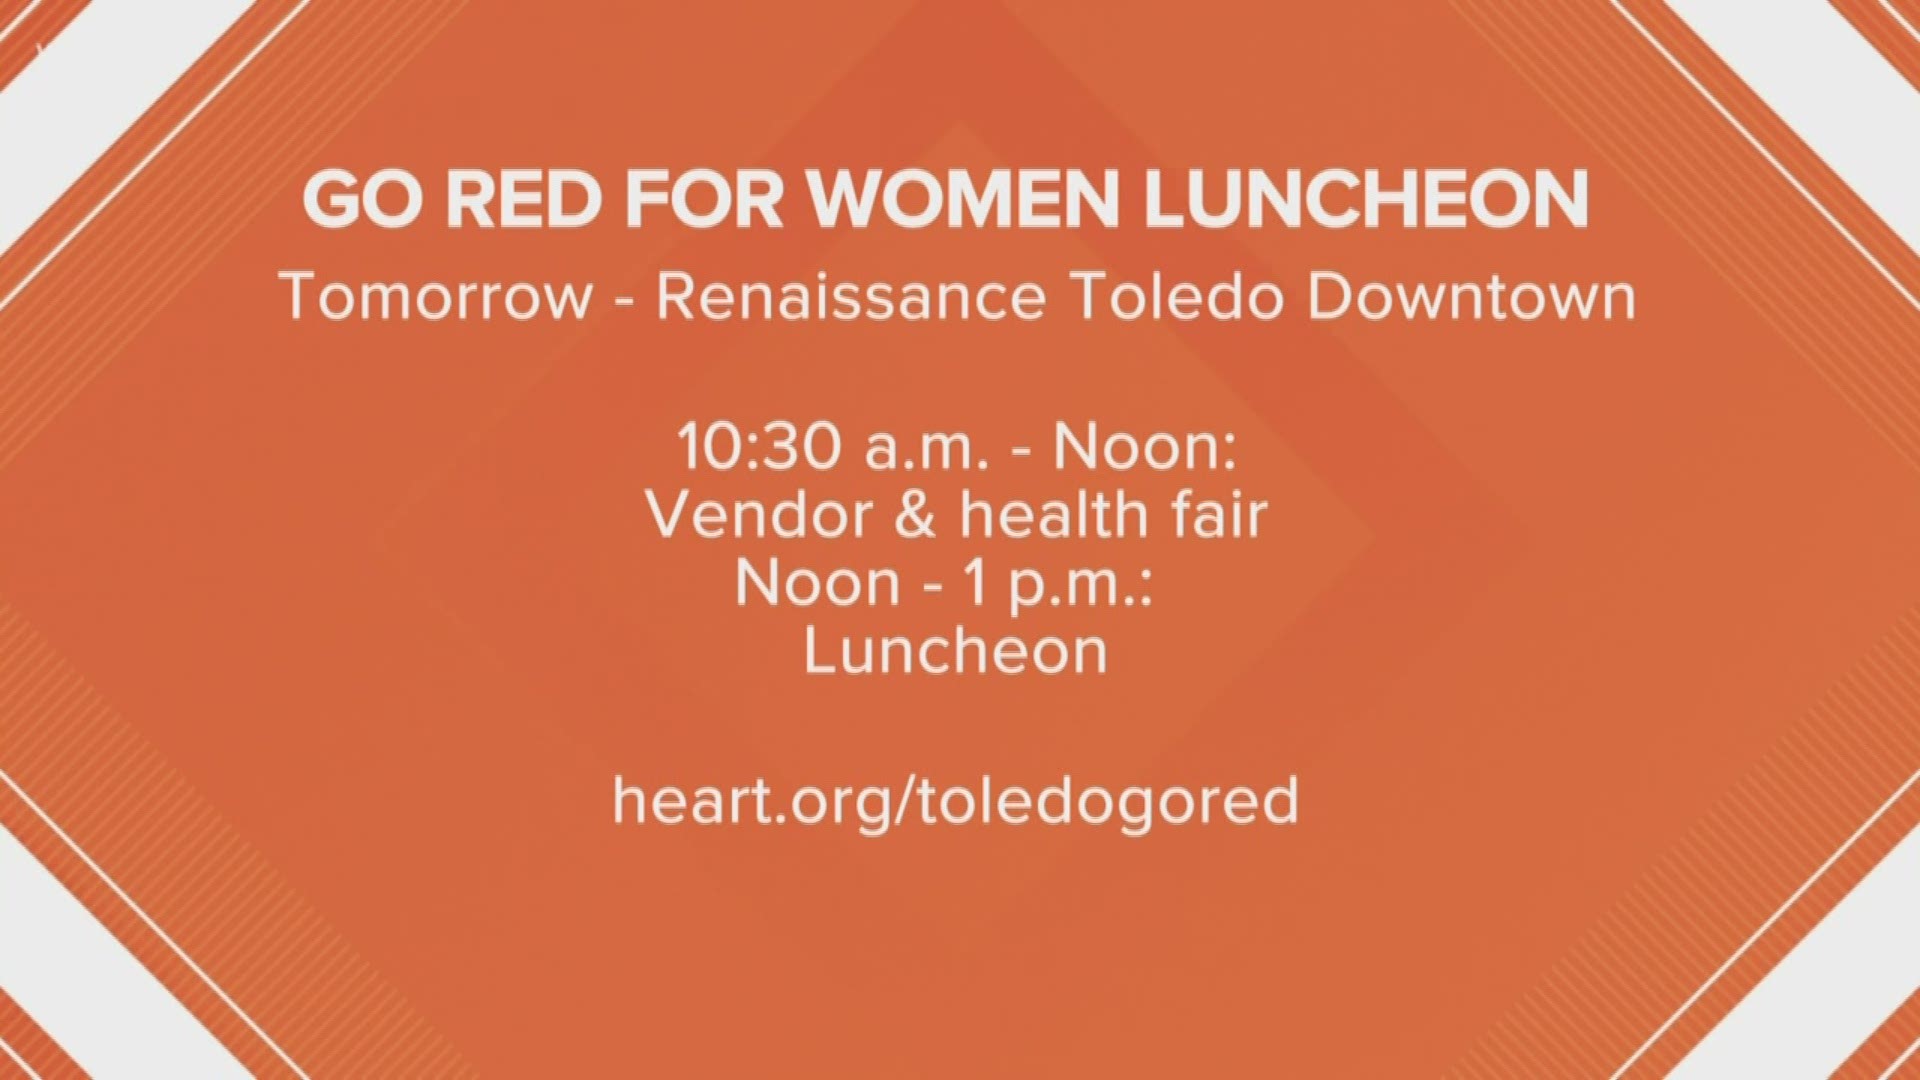 February is Heart Month, and the American Heart Association invites you to the Go Red for Women Luncheon tomorrow!